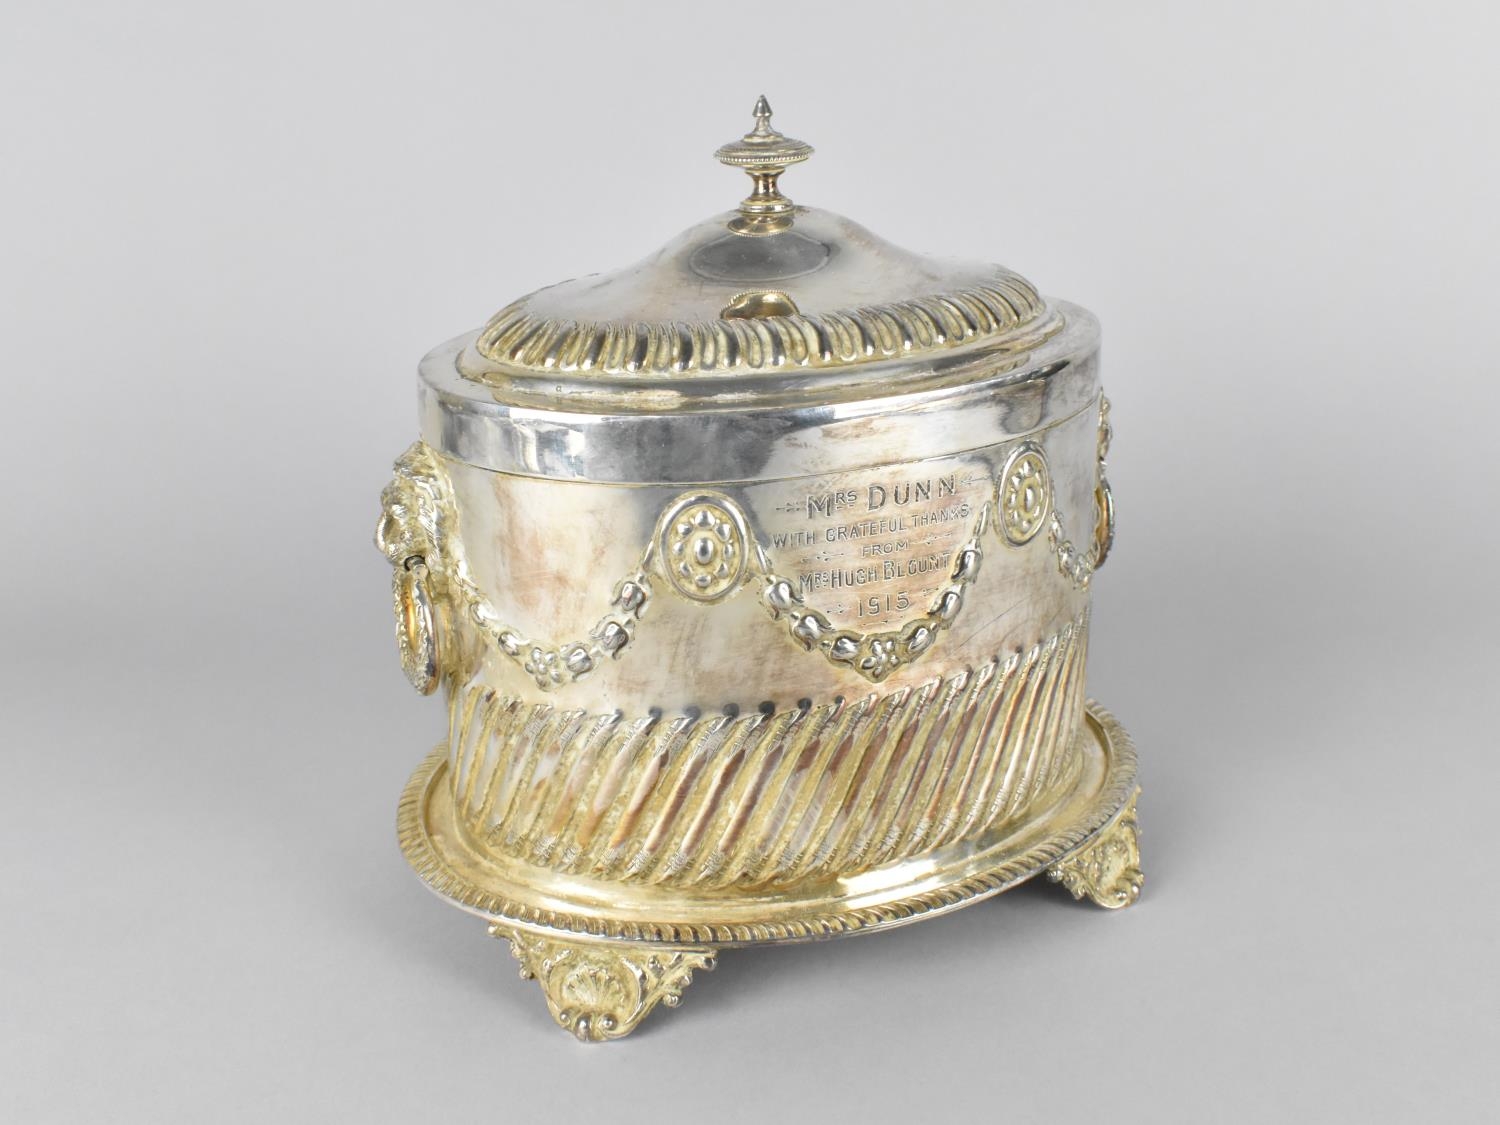 An Early 20th Century Silver Plated Presentation Biscuit Barrel of Oval Form, the Body with Lion